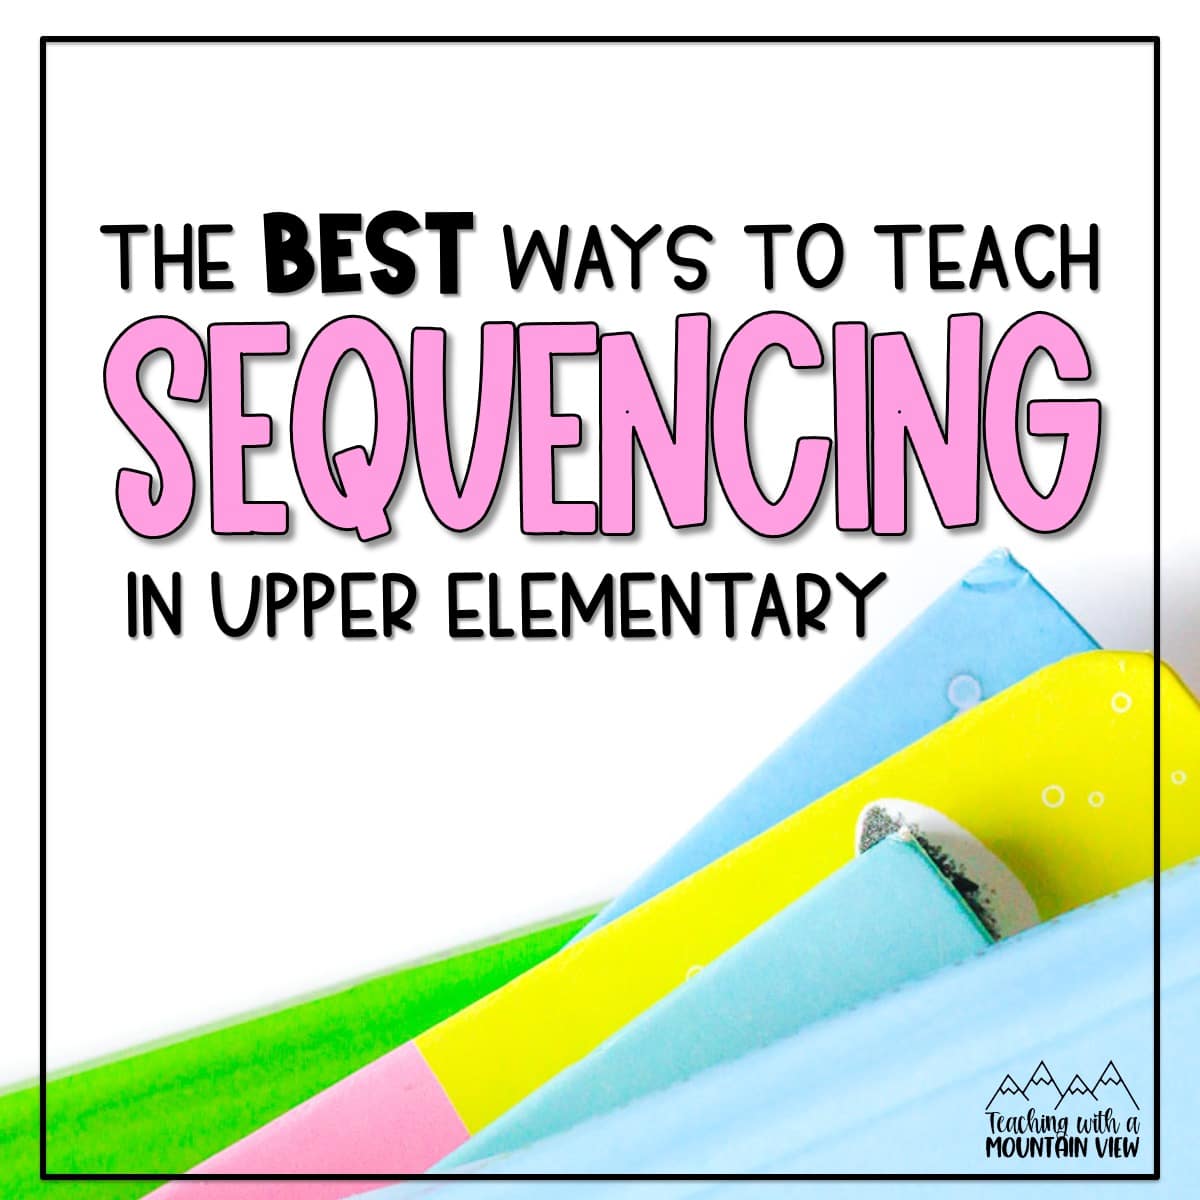 Includes anchor chart and centers for how to teach sequencing as the foundation of many key reading skills in upper elementary.